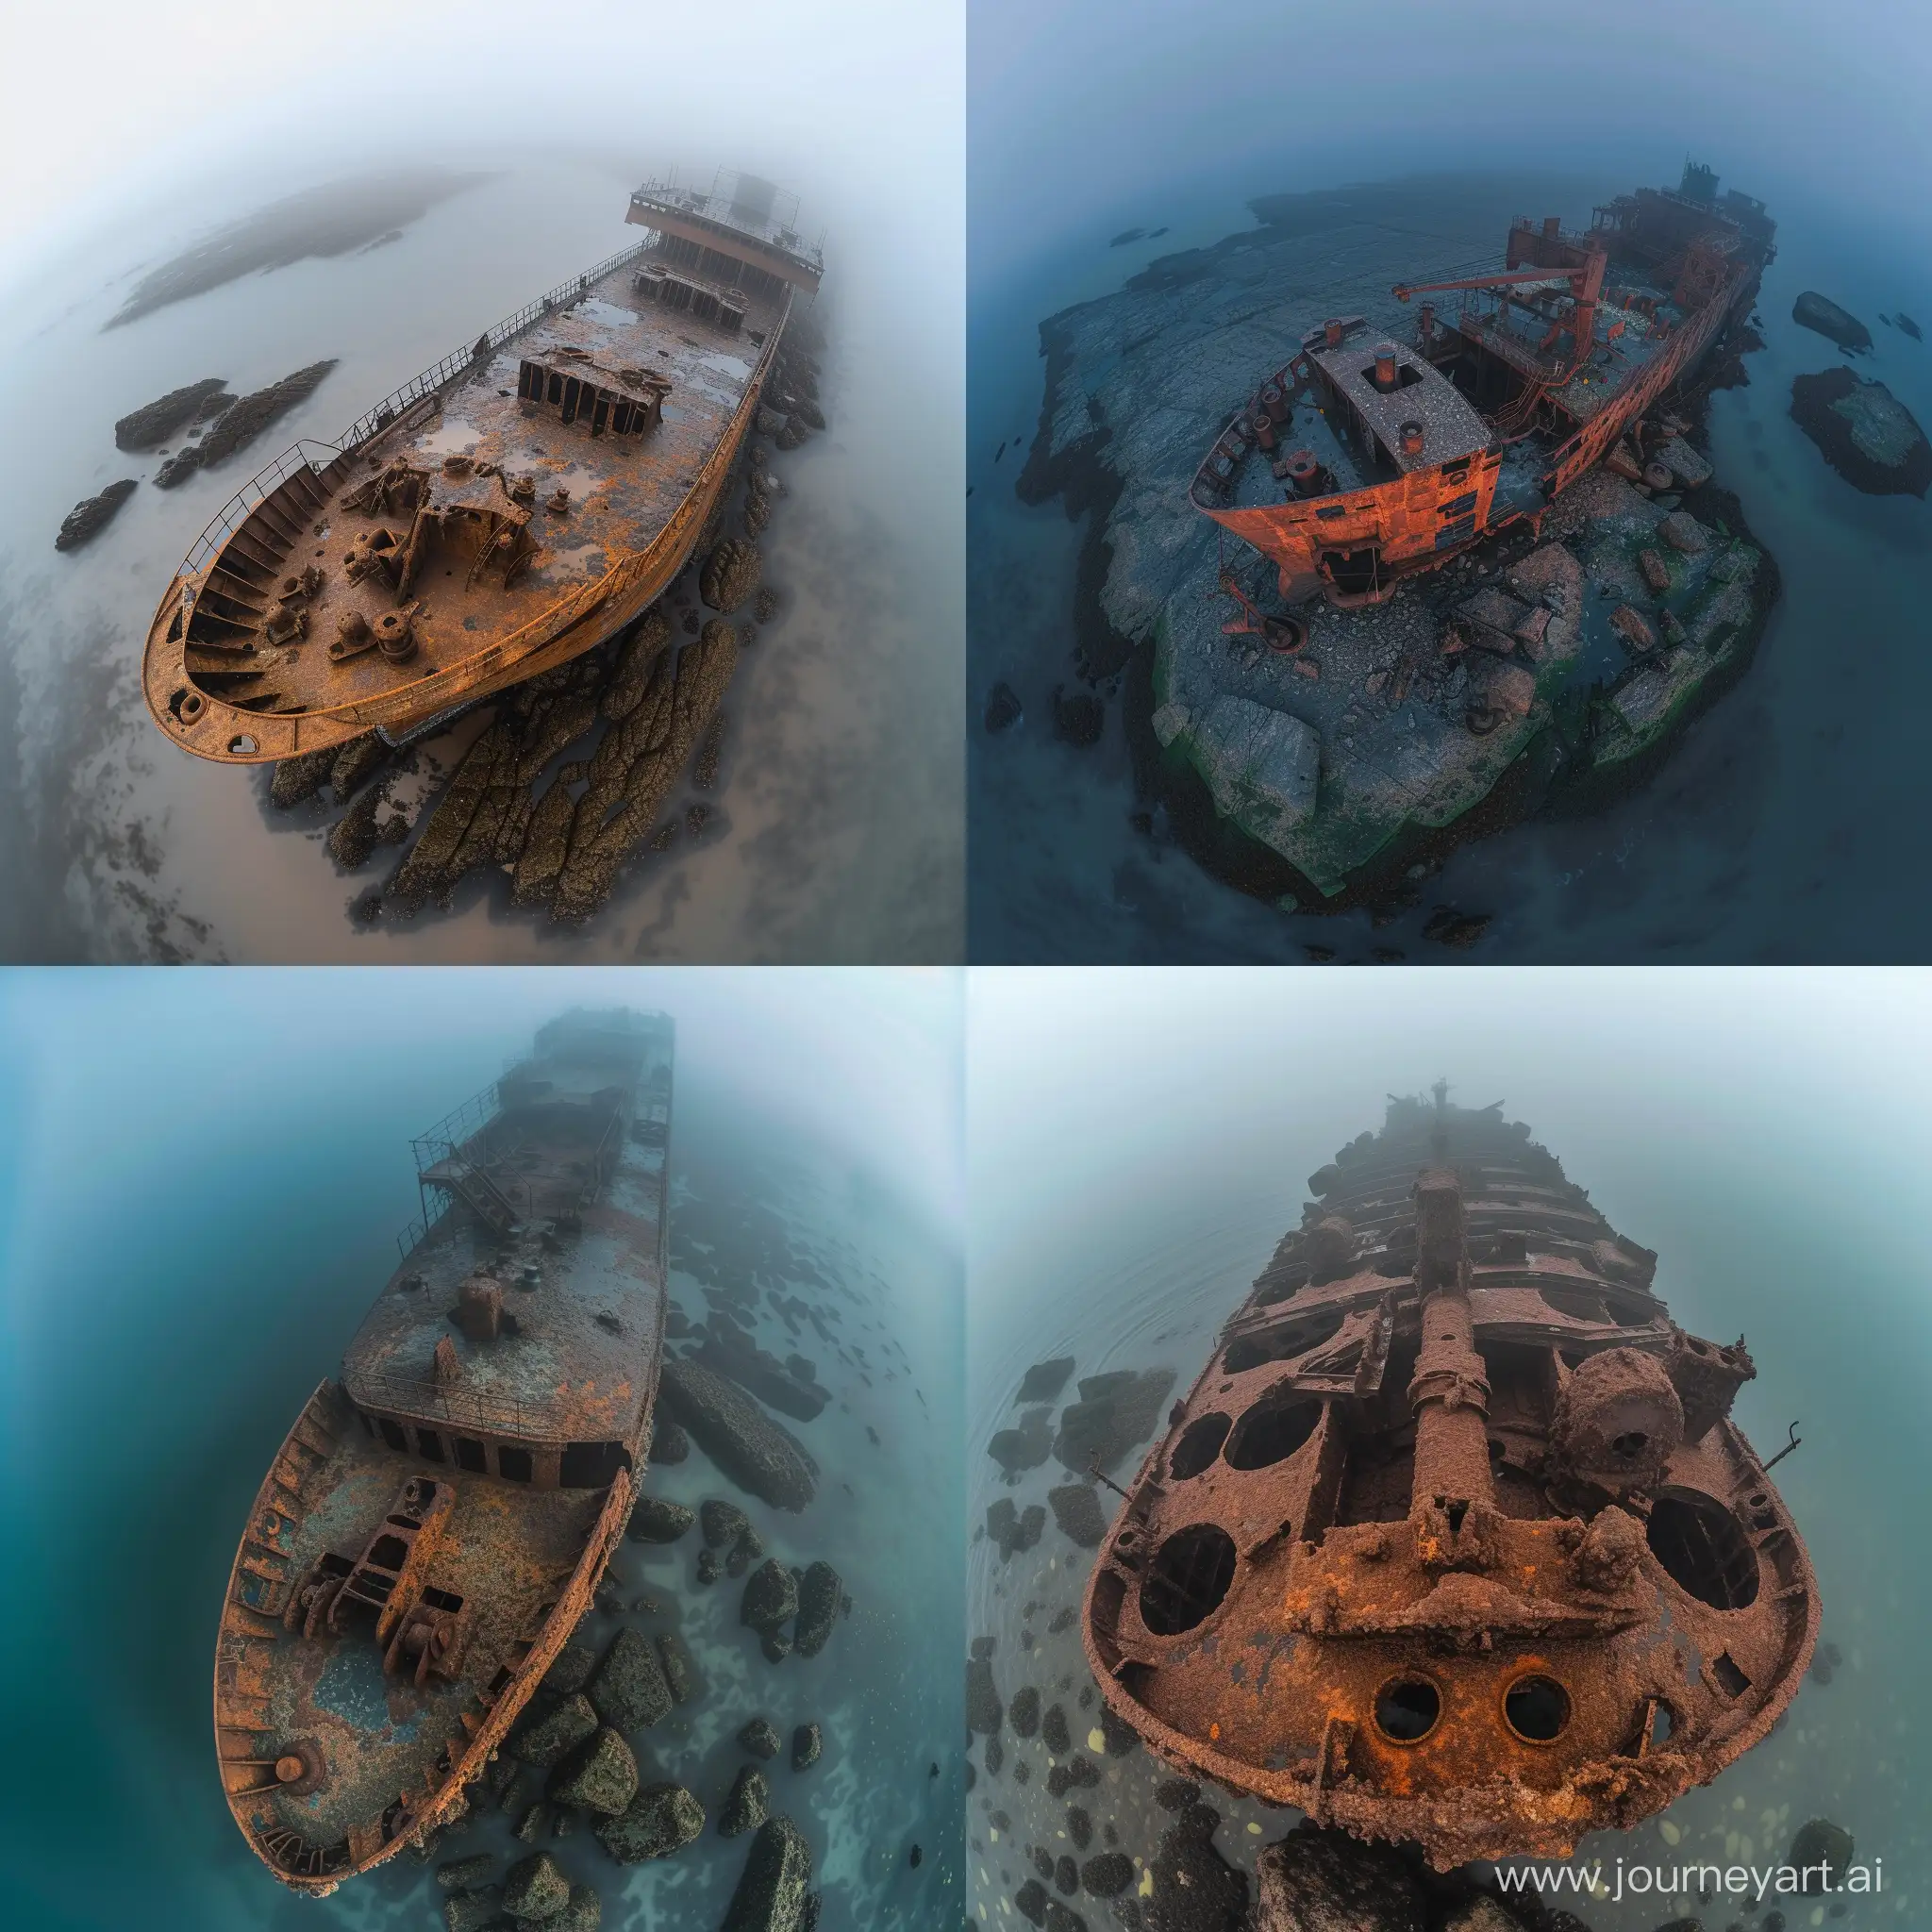 long_exposure aerial_photograph shot by Sony A7R II with a fisheye_lens and circular_polarizer at dawn during thick_fog, of the heavily_rusted shipwreck of a bulk_carrier on gneiss_boulders in a silted muddy_ocean with algal_blooms --style raw